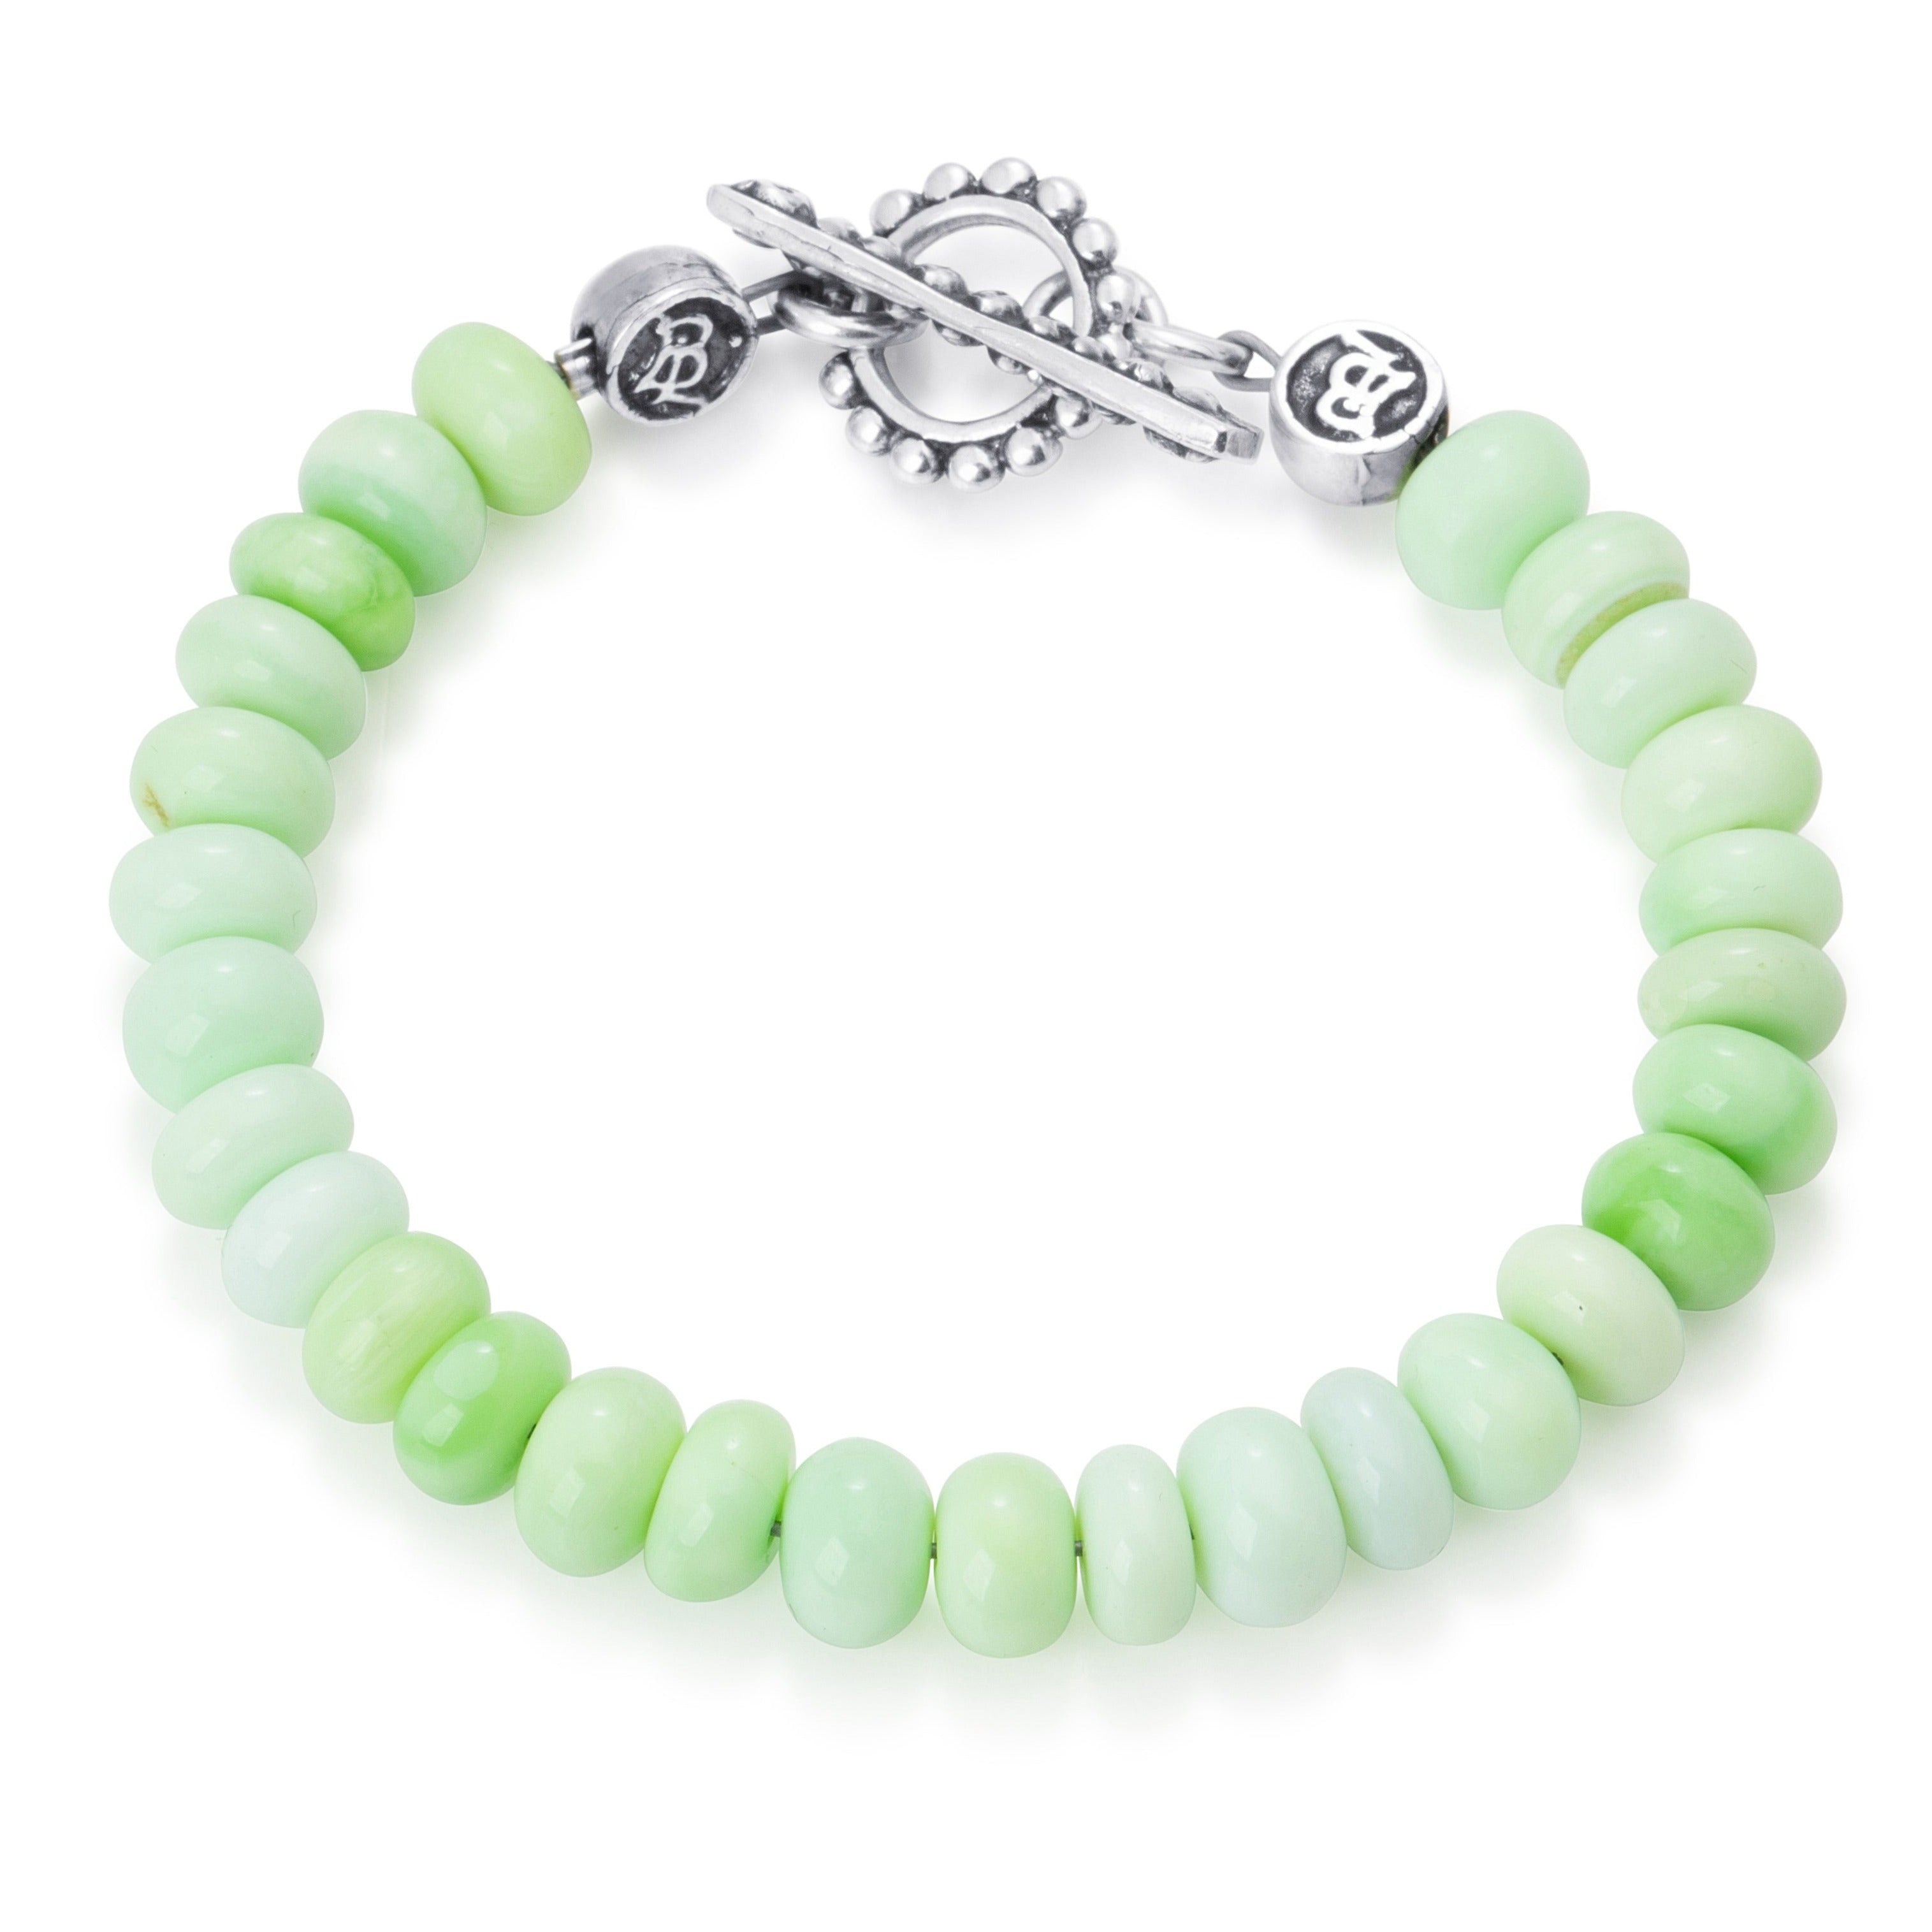 Oval Green Peruvian Opal beads on a stainless steel cable with Sterling silver T clasp.